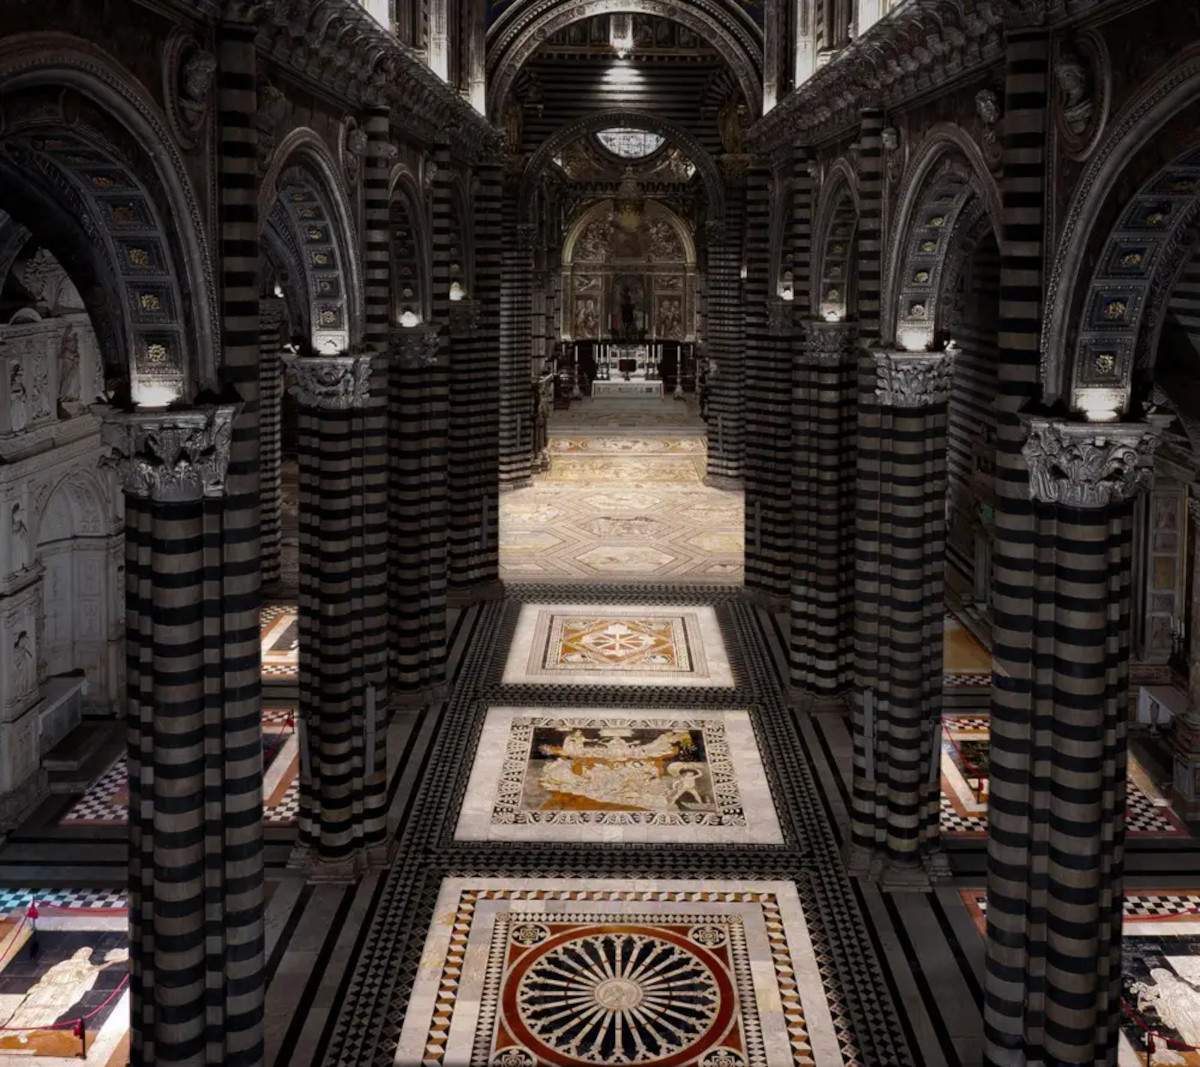 Siena's cathedral returns to fully uncover its precious marble commesso floor 